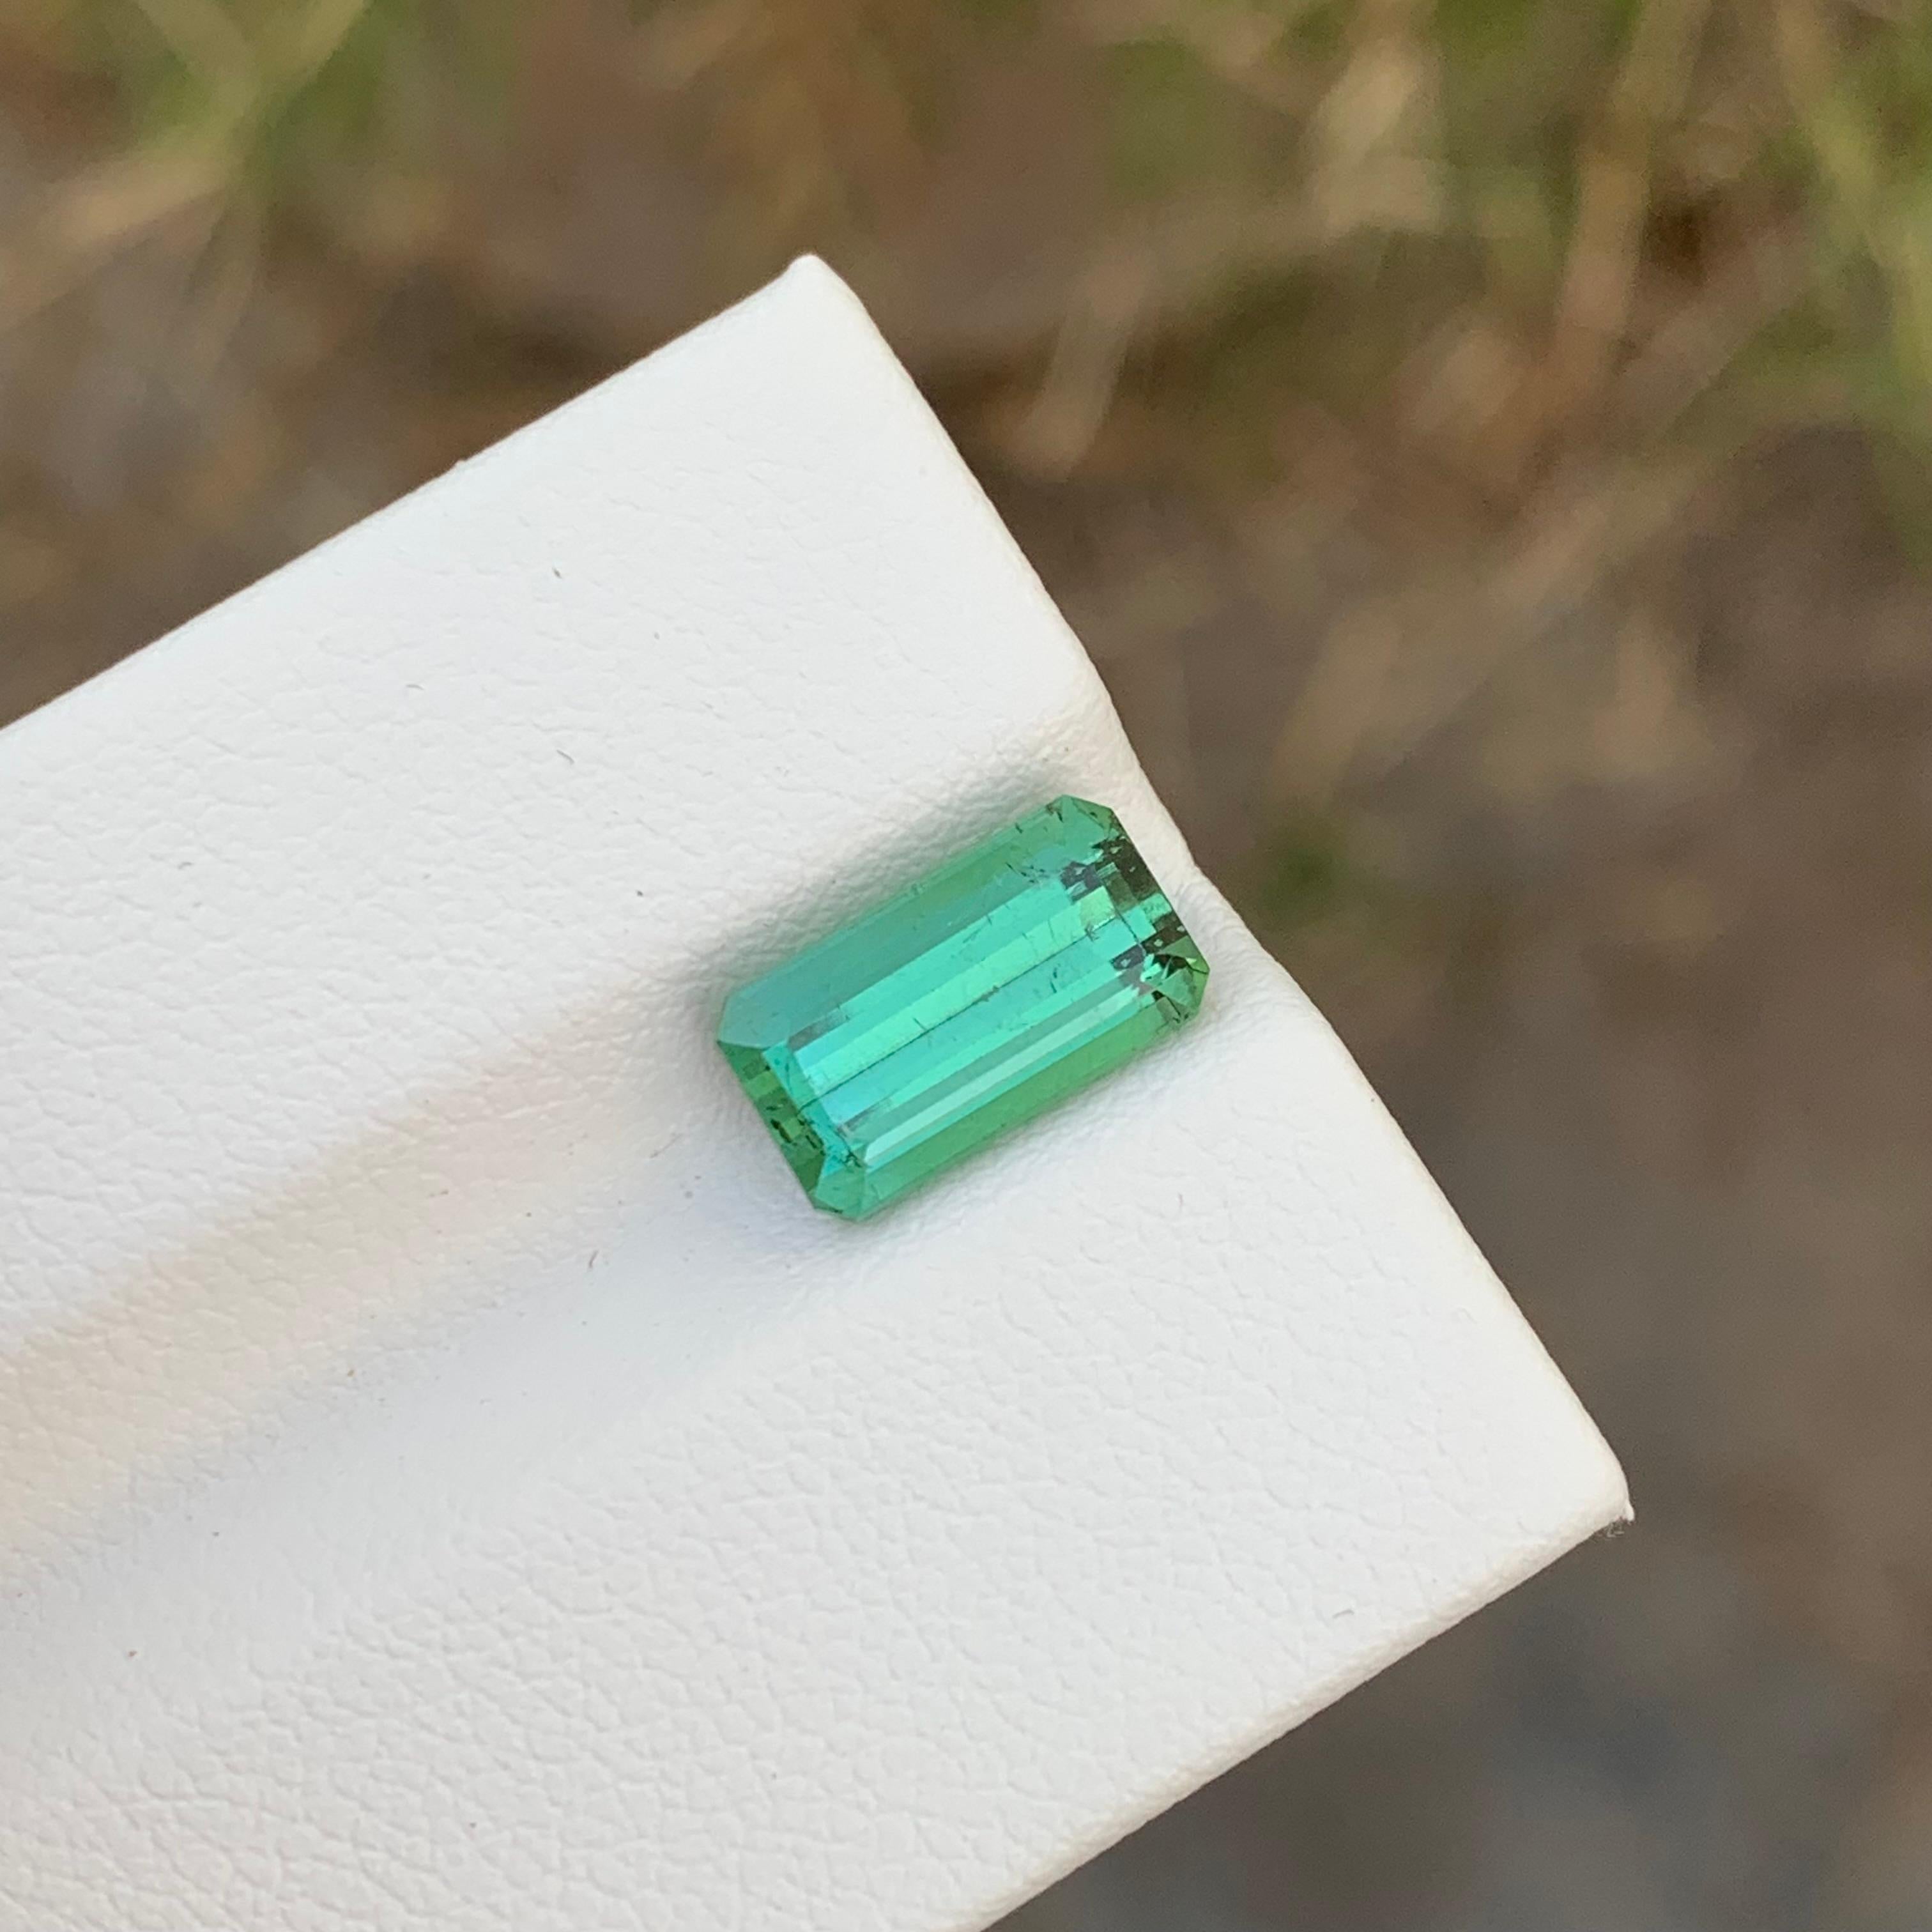 Loose Mint Tourmaline
Weight: 2.85 Carats
Dimension: 10.4 x 5.8 x 5 Mm
Colour : Mint Green
Origin: Afghanistan
Shape: Emerald
Certificate: On Demand
Treatment: Non

Mint tourmaline, a delicate and soothing variety within the tourmaline family,